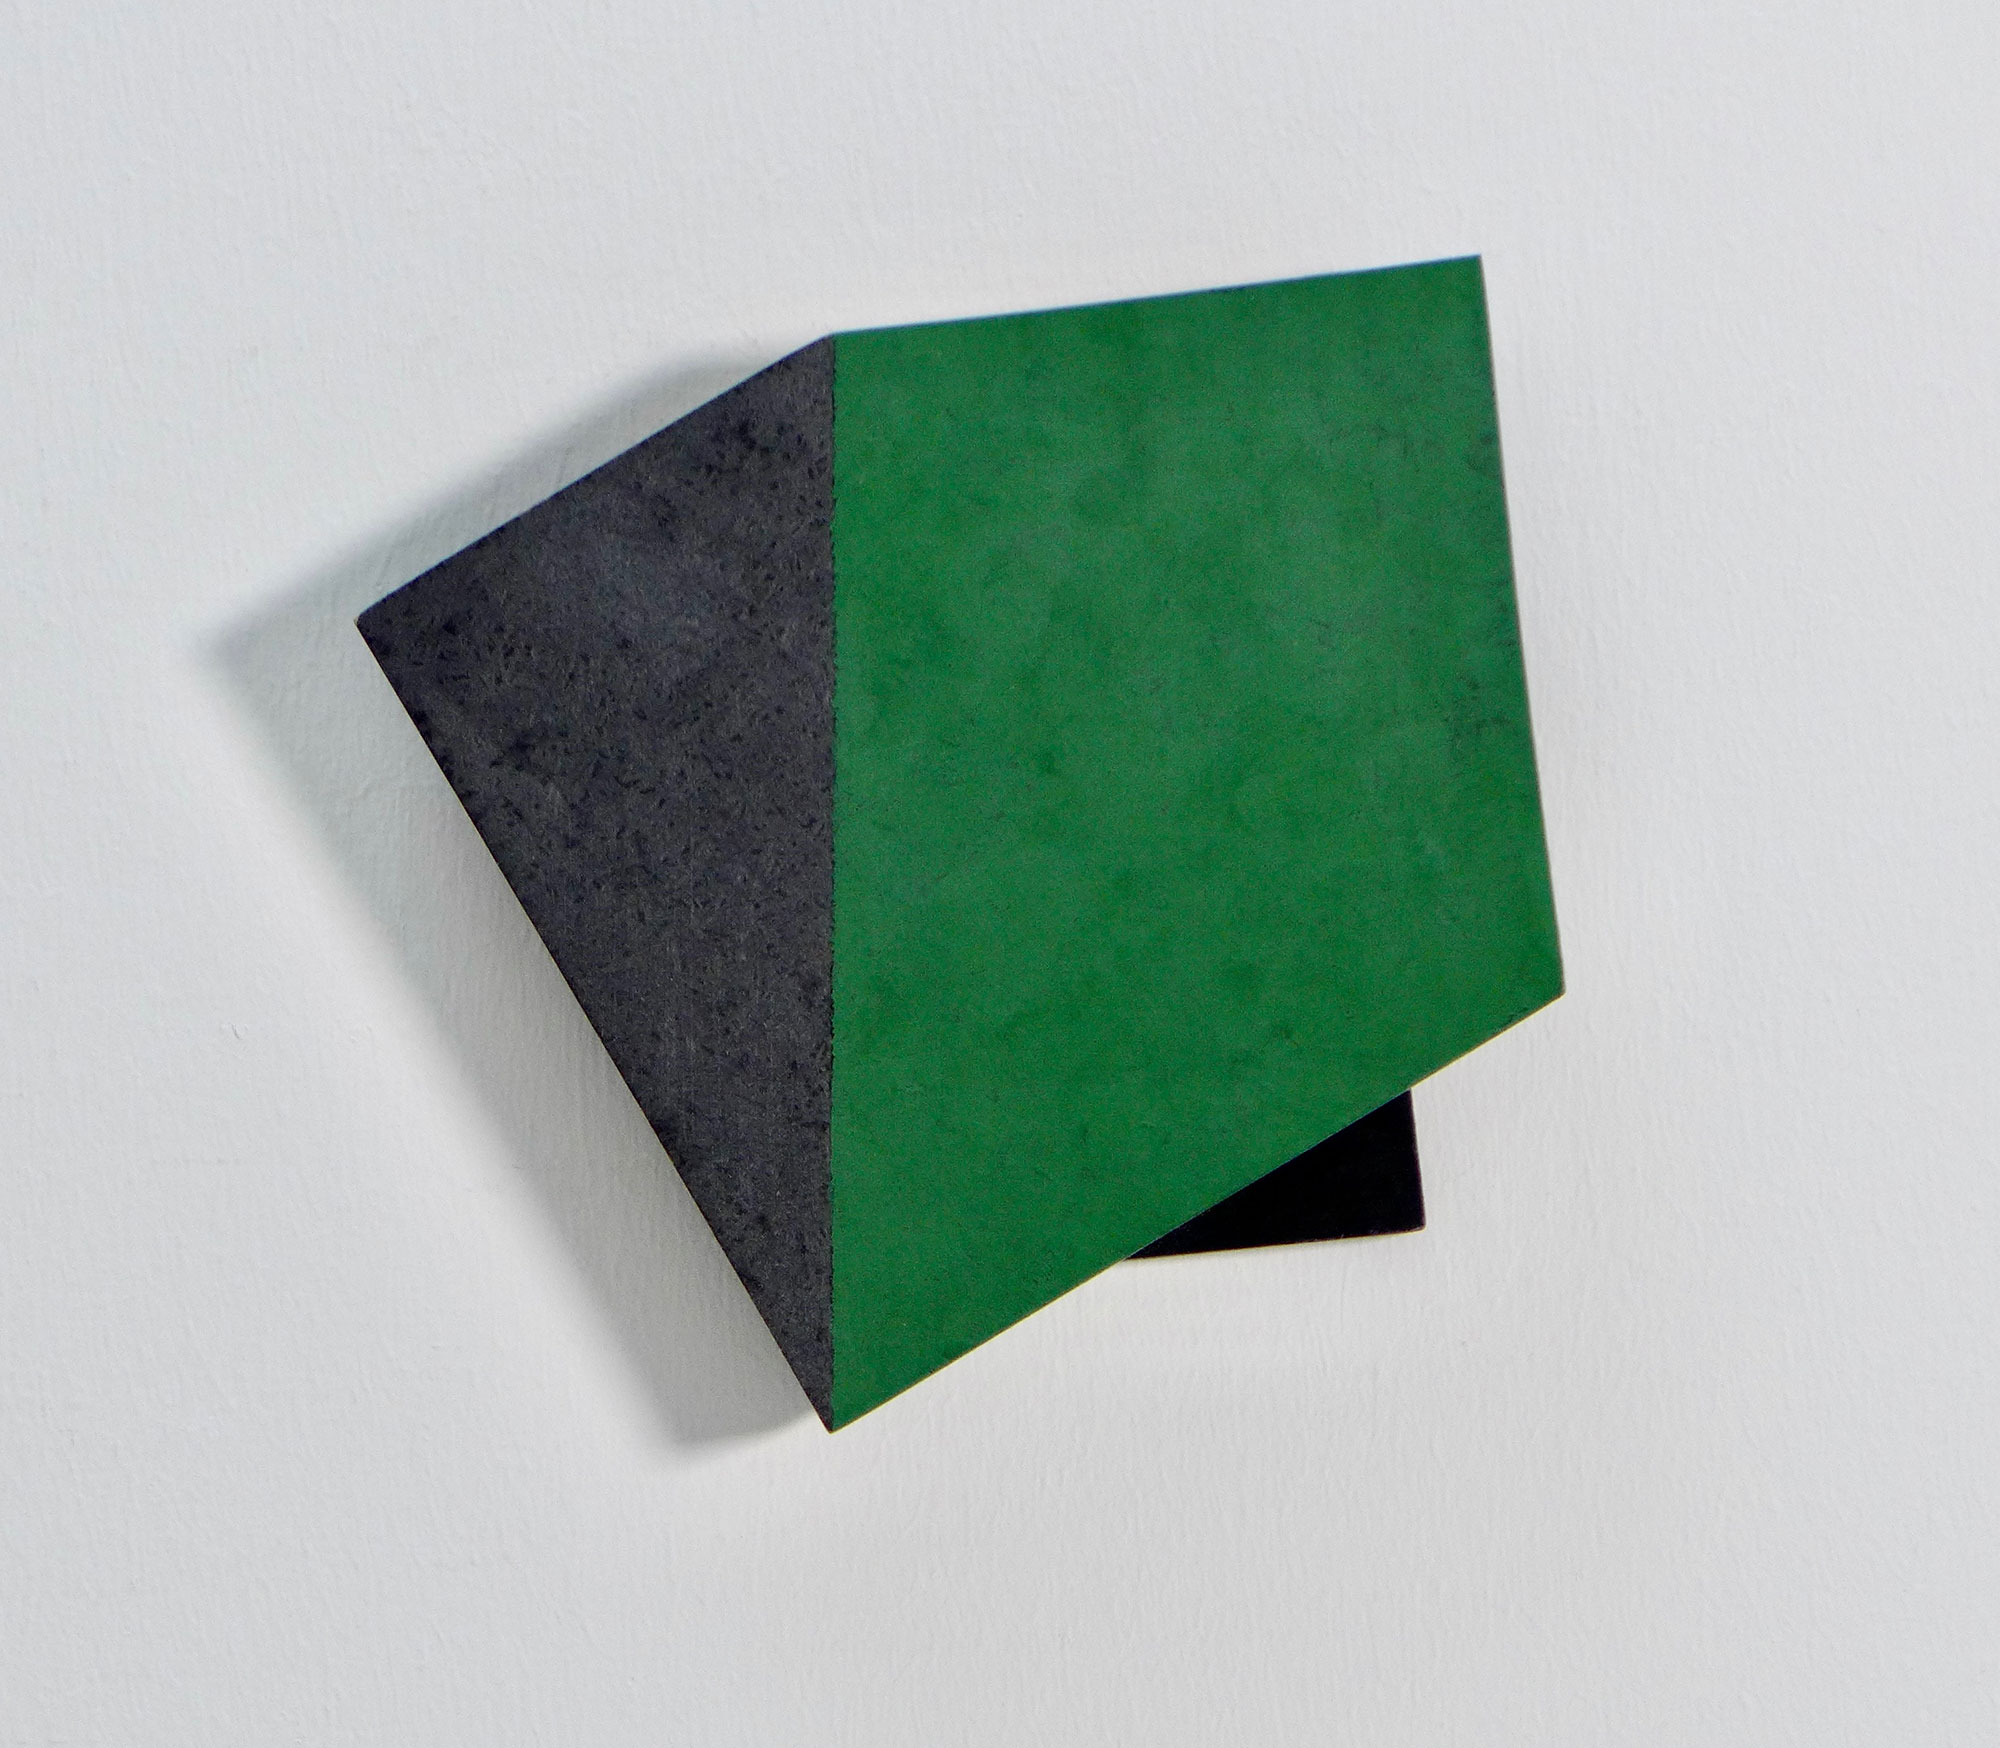 Kenneth Dingwall, And That, 2012, graphite & casein on mdf, 15 x 16 x 3cm